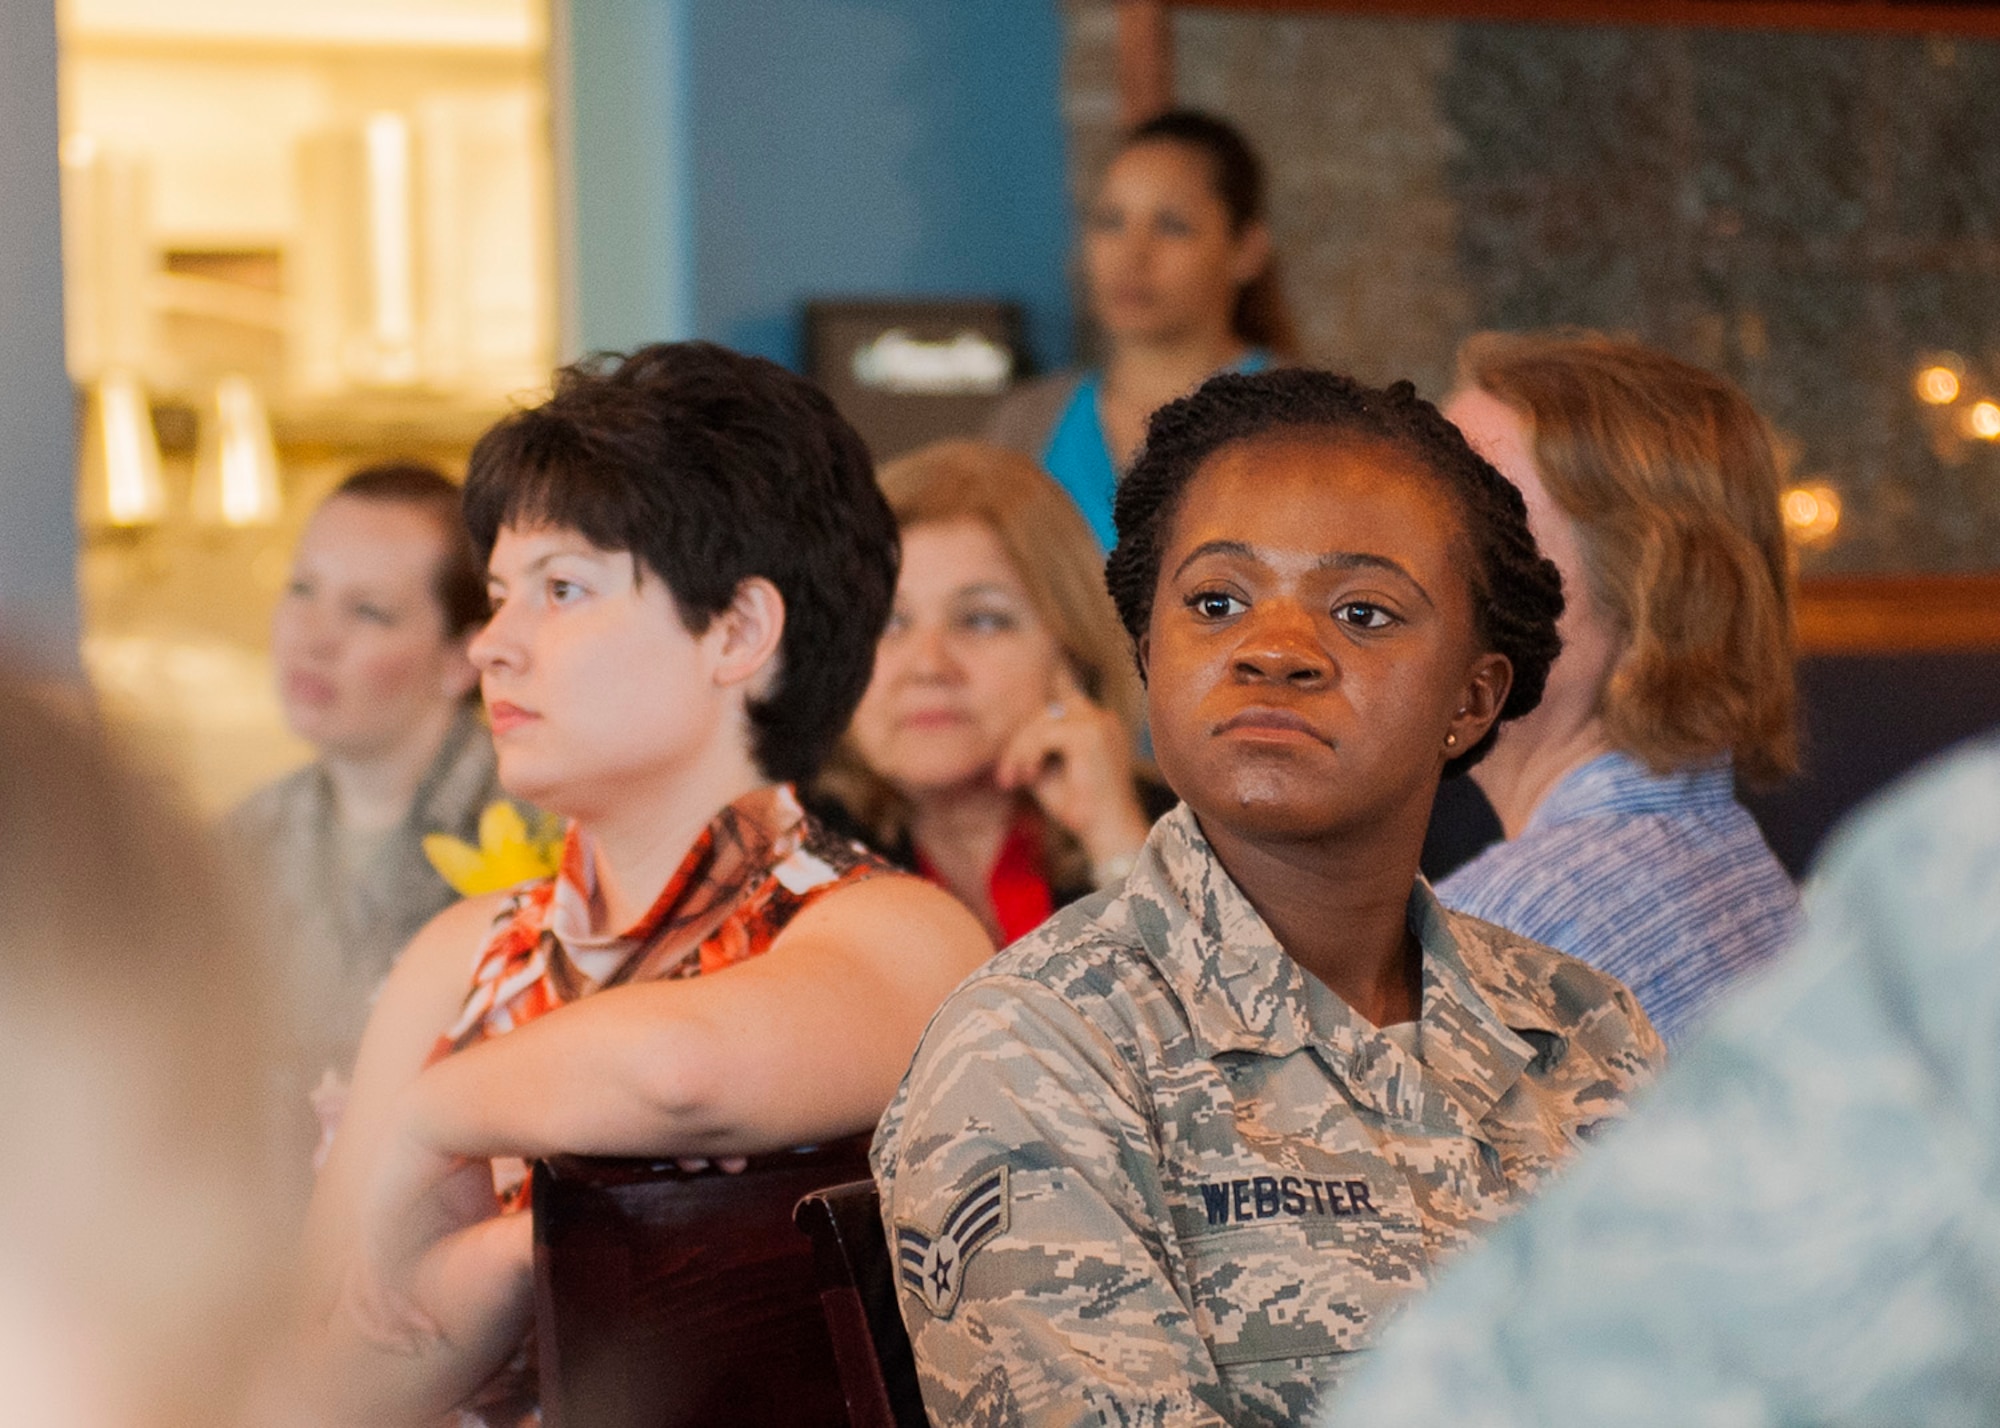 Women's History Month luncheon attendees listen to Lt. Col. Christine Mau, 33rd Operations Group deputy commander, share her career and life experiences leading up to her becoming the Air Force's first female F-35 pilot during the annual event March 31 in Valparaiso, Fla. (U.S. Air Force photo/Ilka Cole)